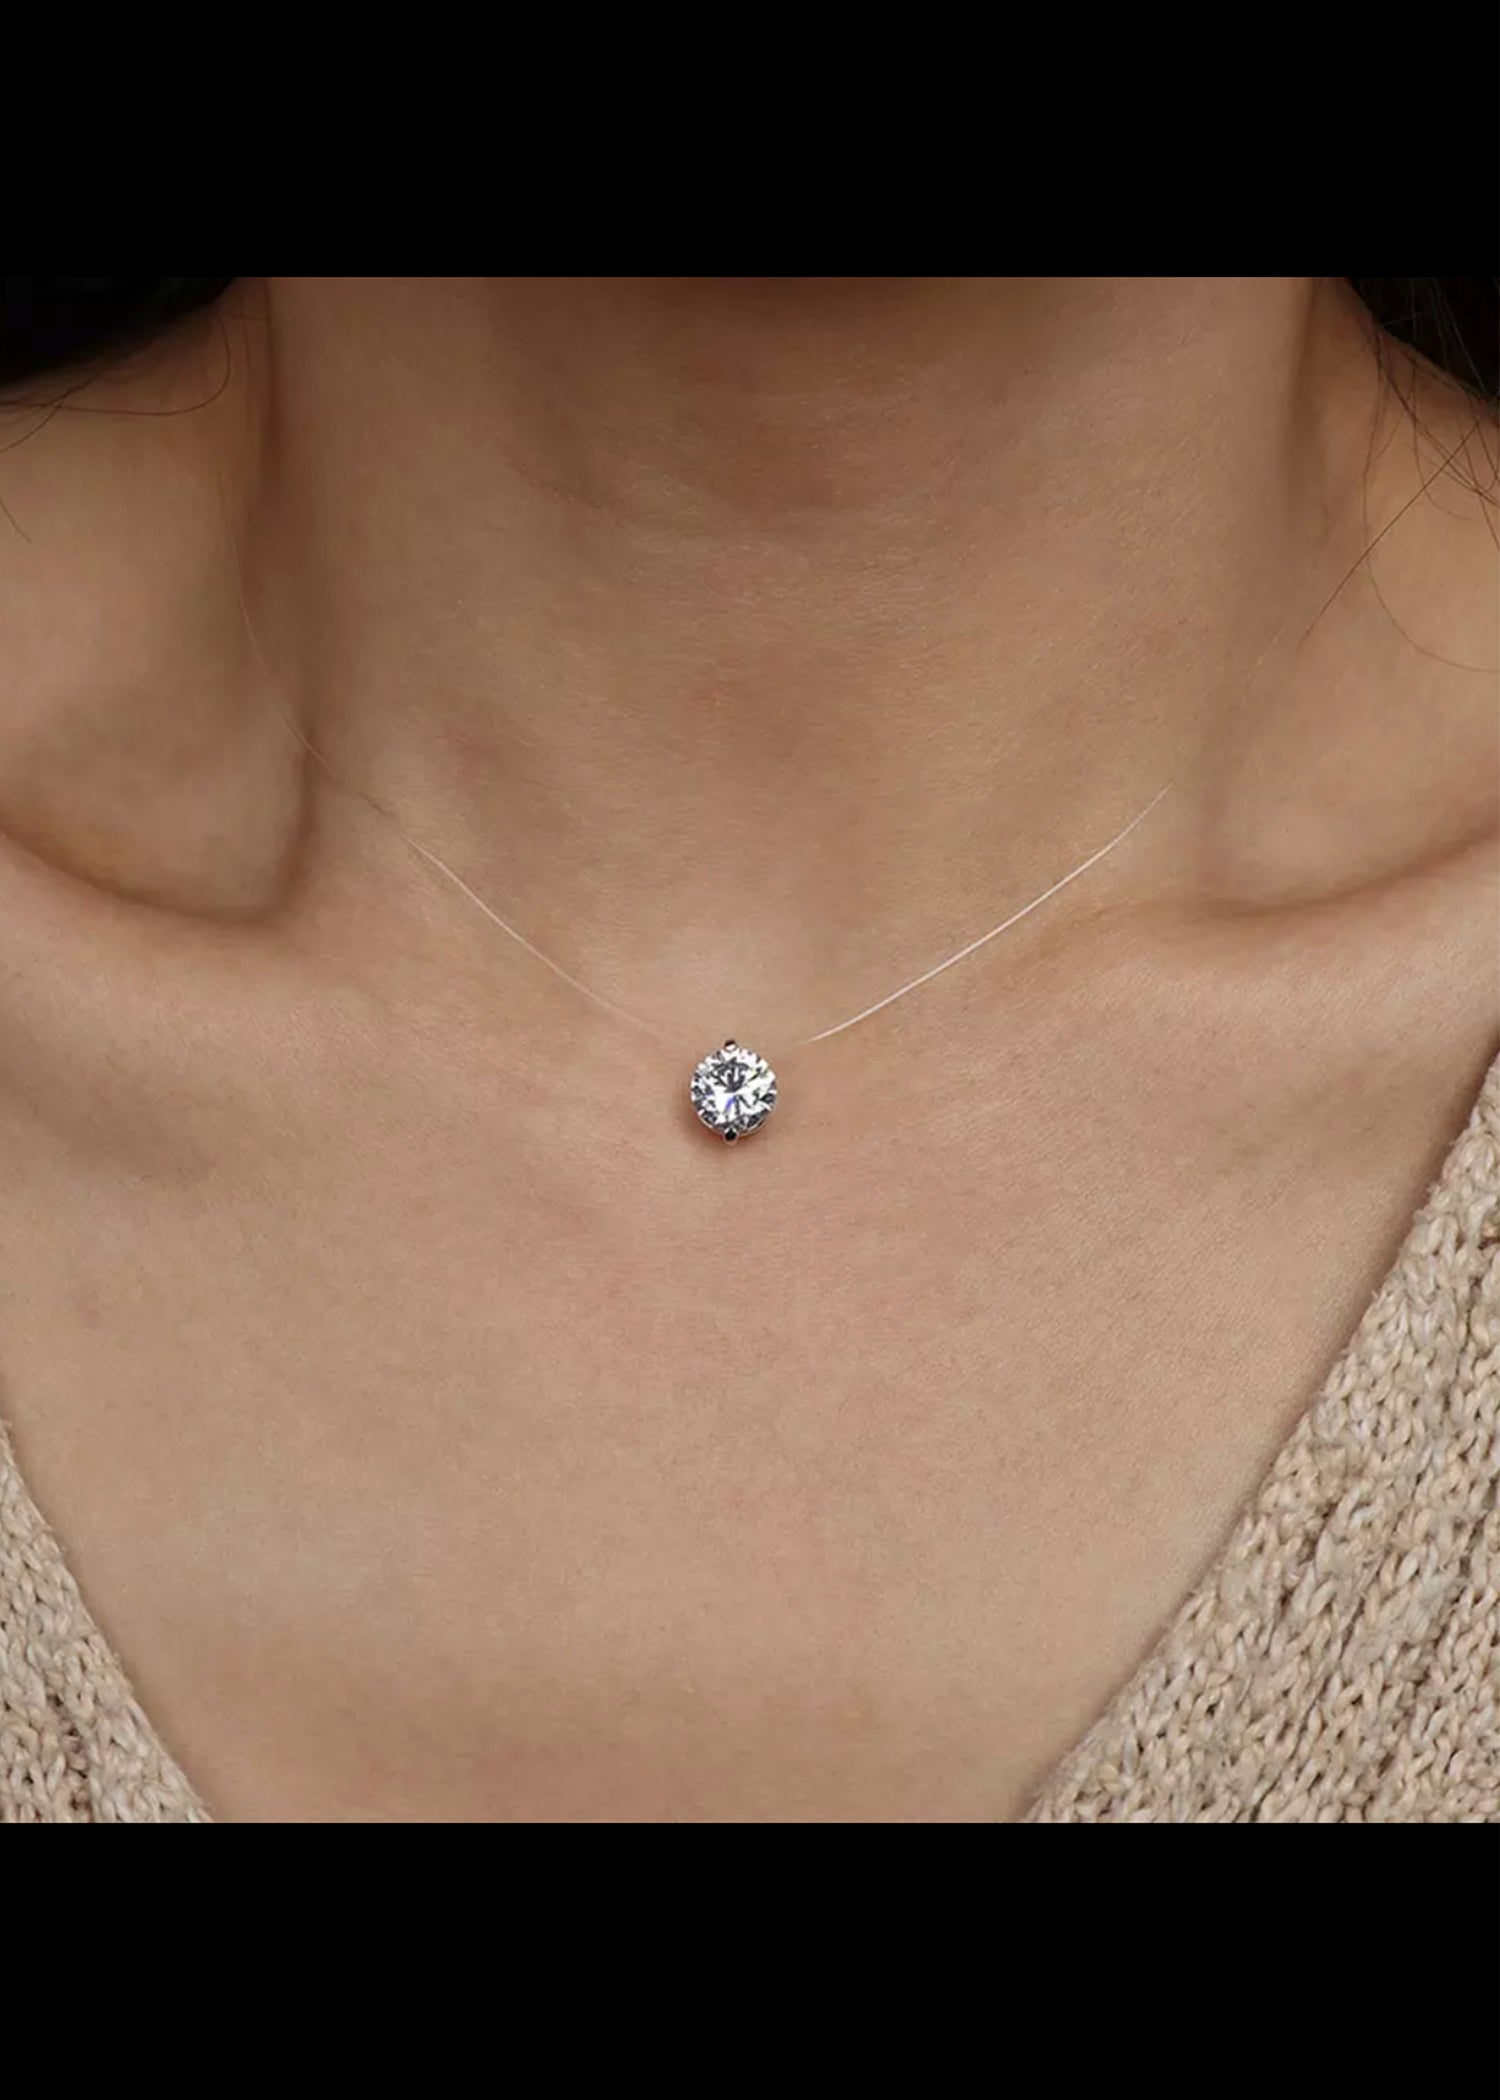 Invisible necklace with charm